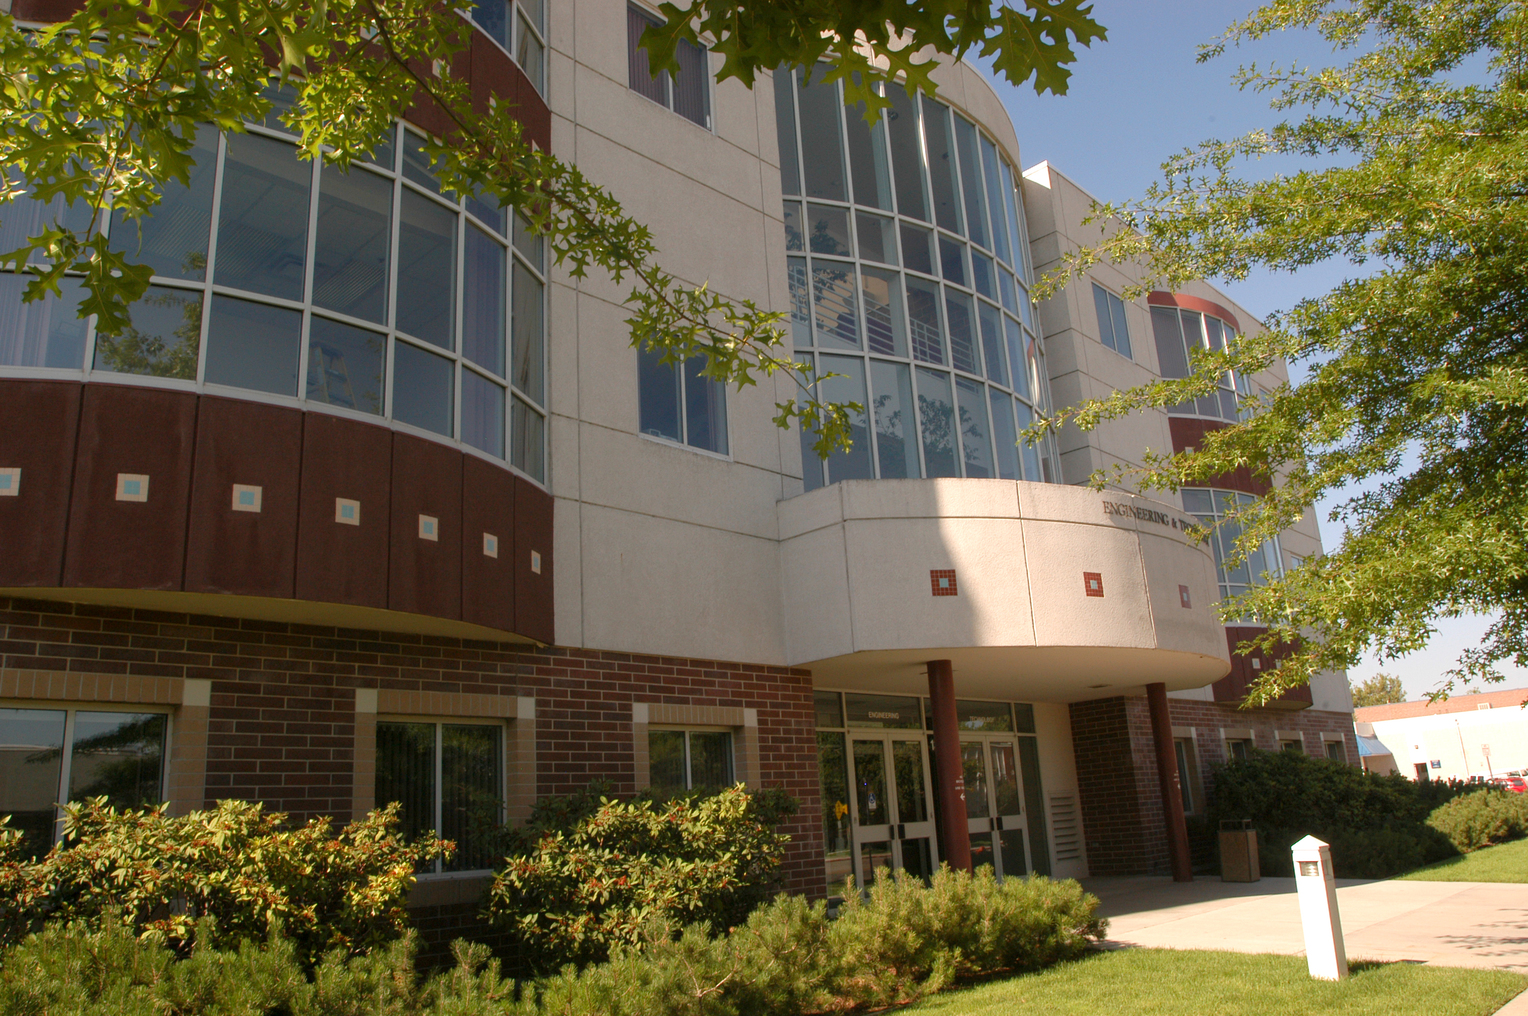 Exterior of the Ruch Engineering building